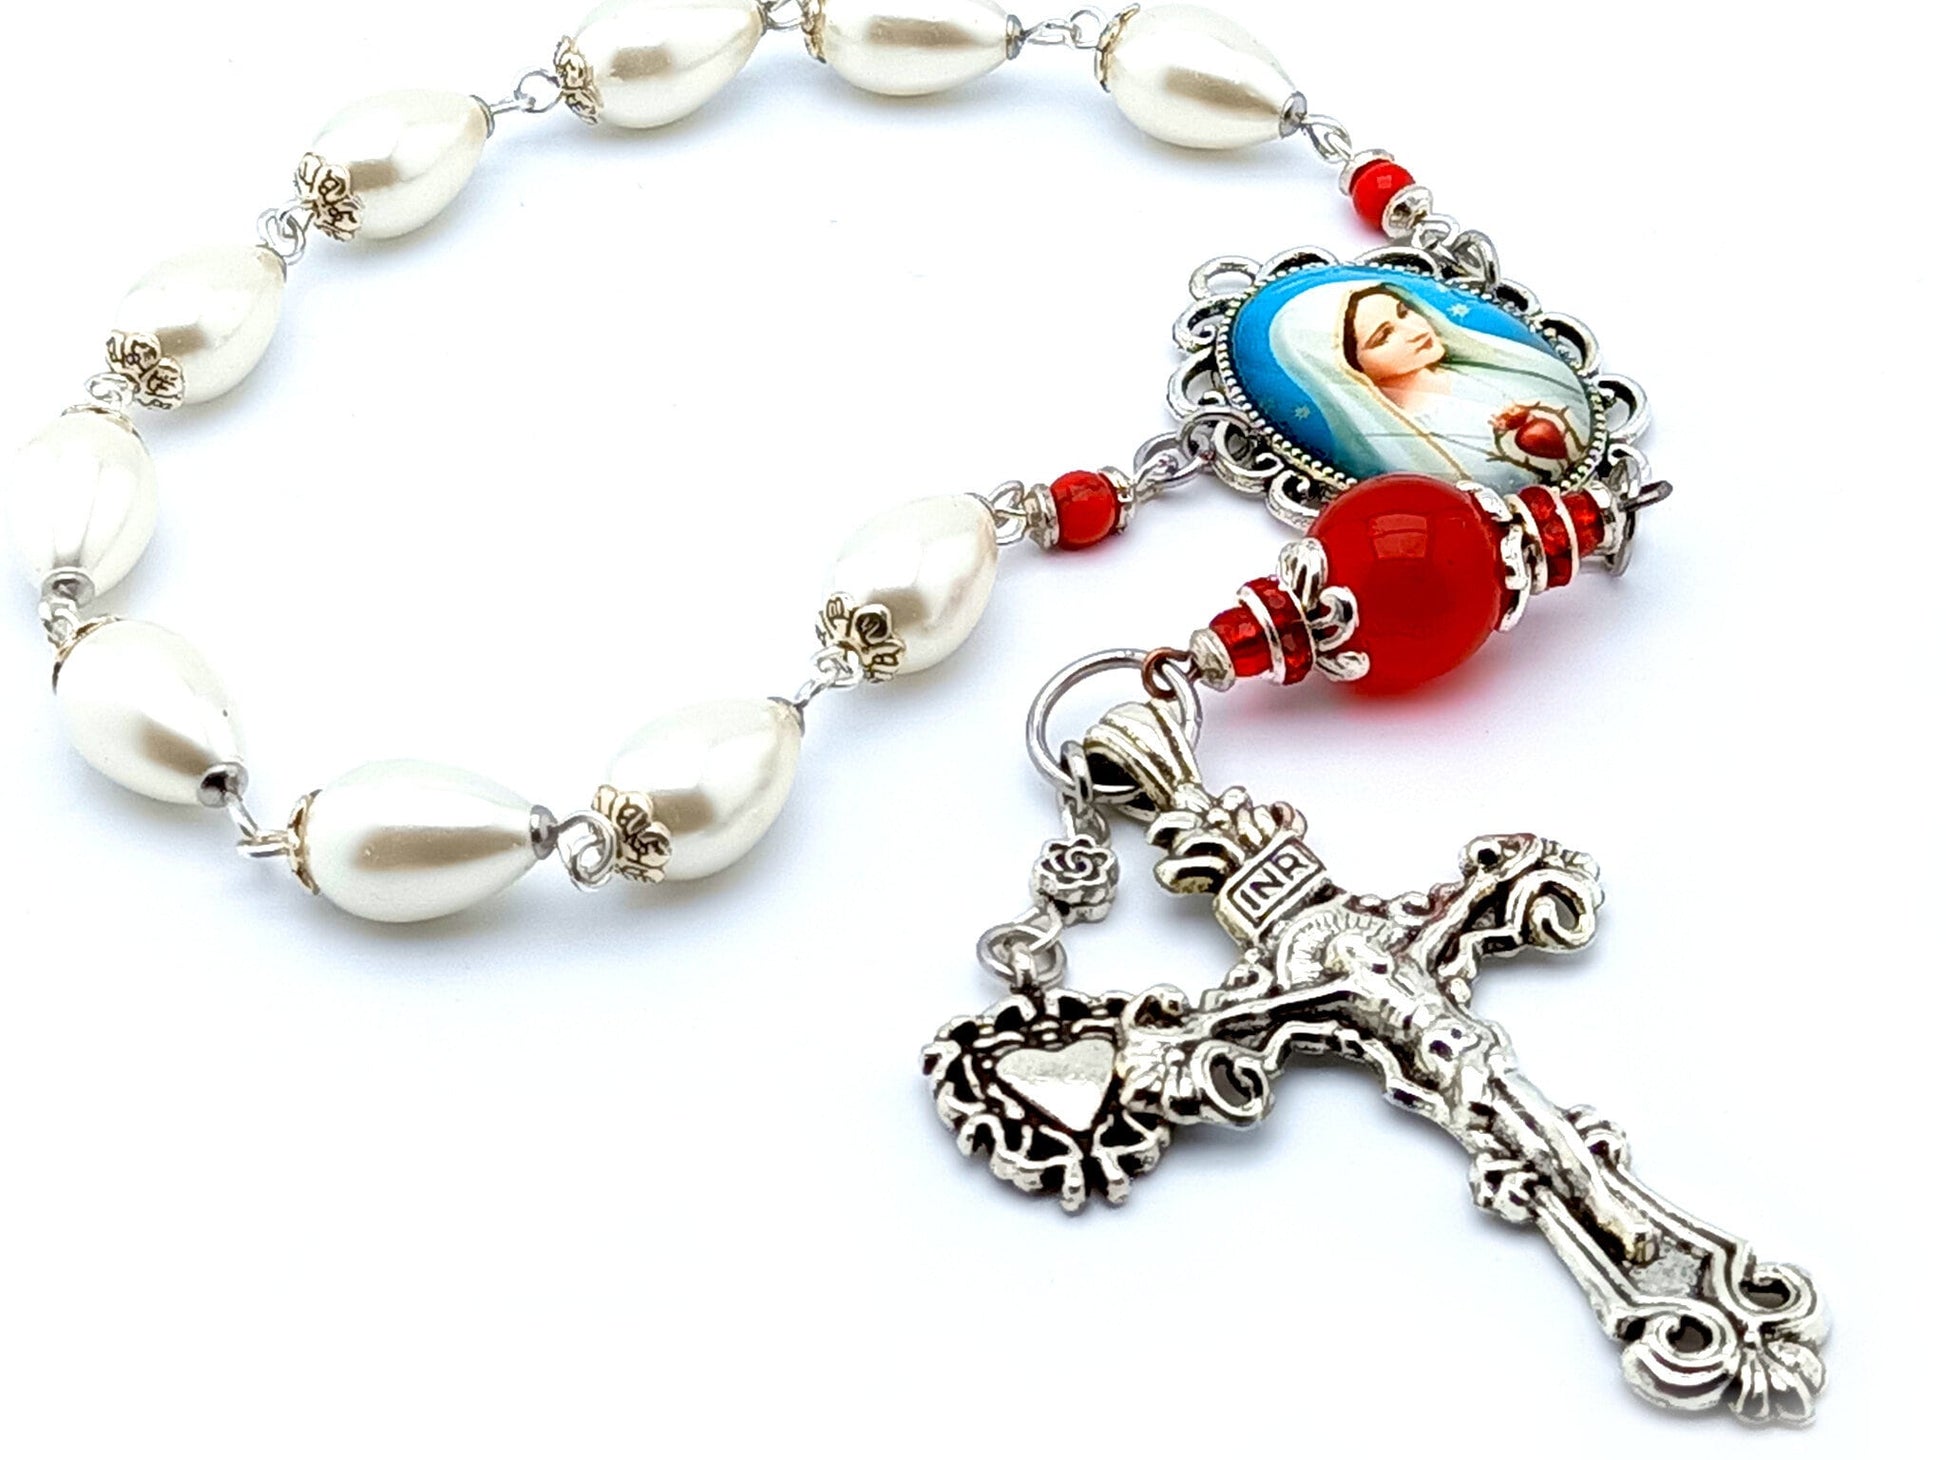 Immaculate Heart of Mary unique rosary beads single decade rosary with pearl and ruby gemstone beads, silver crucifix and picture centre medal.